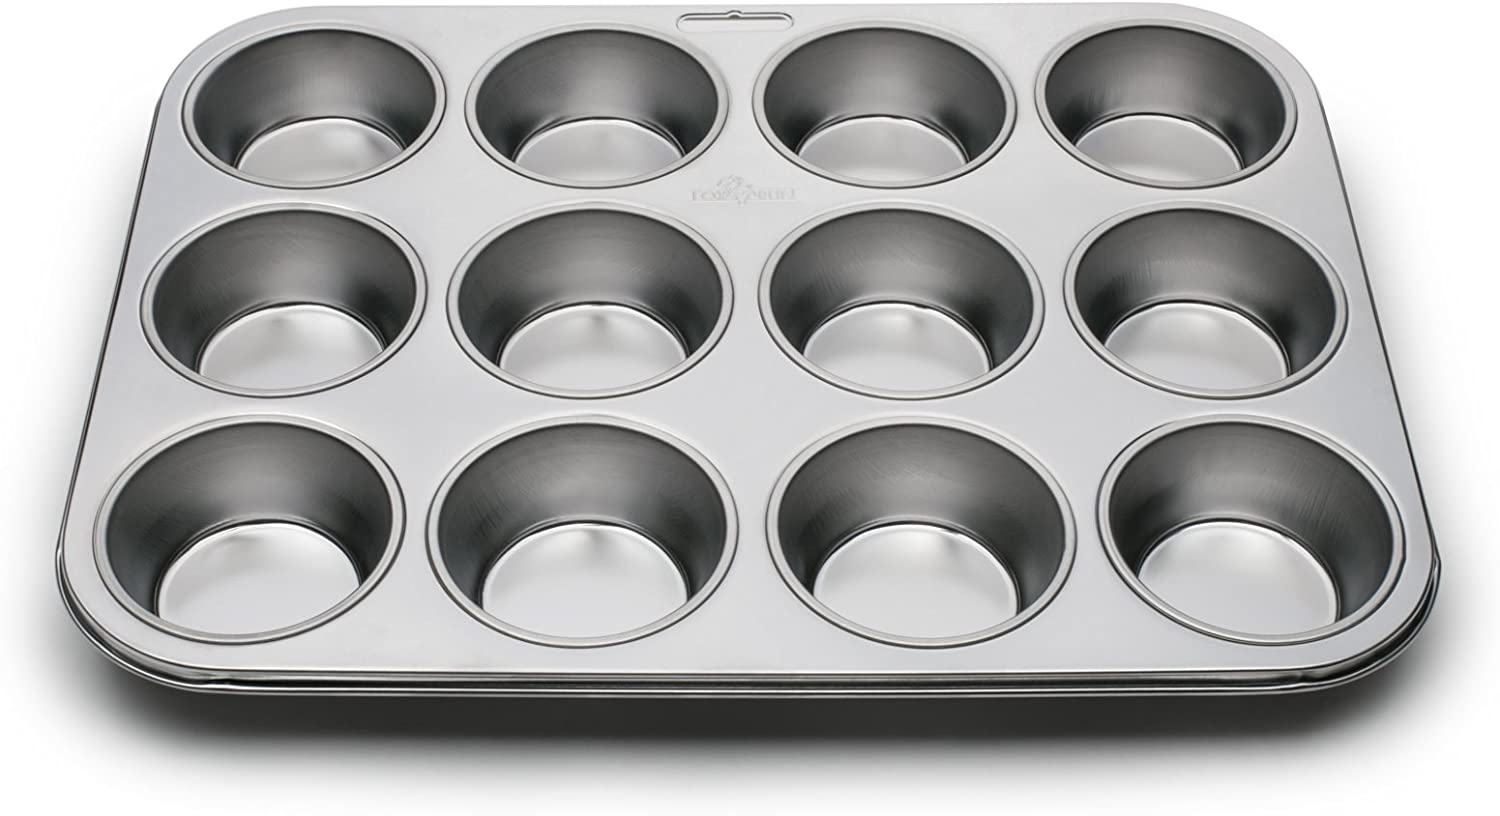 CEKEE 4 Pack Small Baking Pans Set, Nonstick Stainless Steel Cookie Sheets for Baking, Heavy Duty & Dishwasher Safe Small She